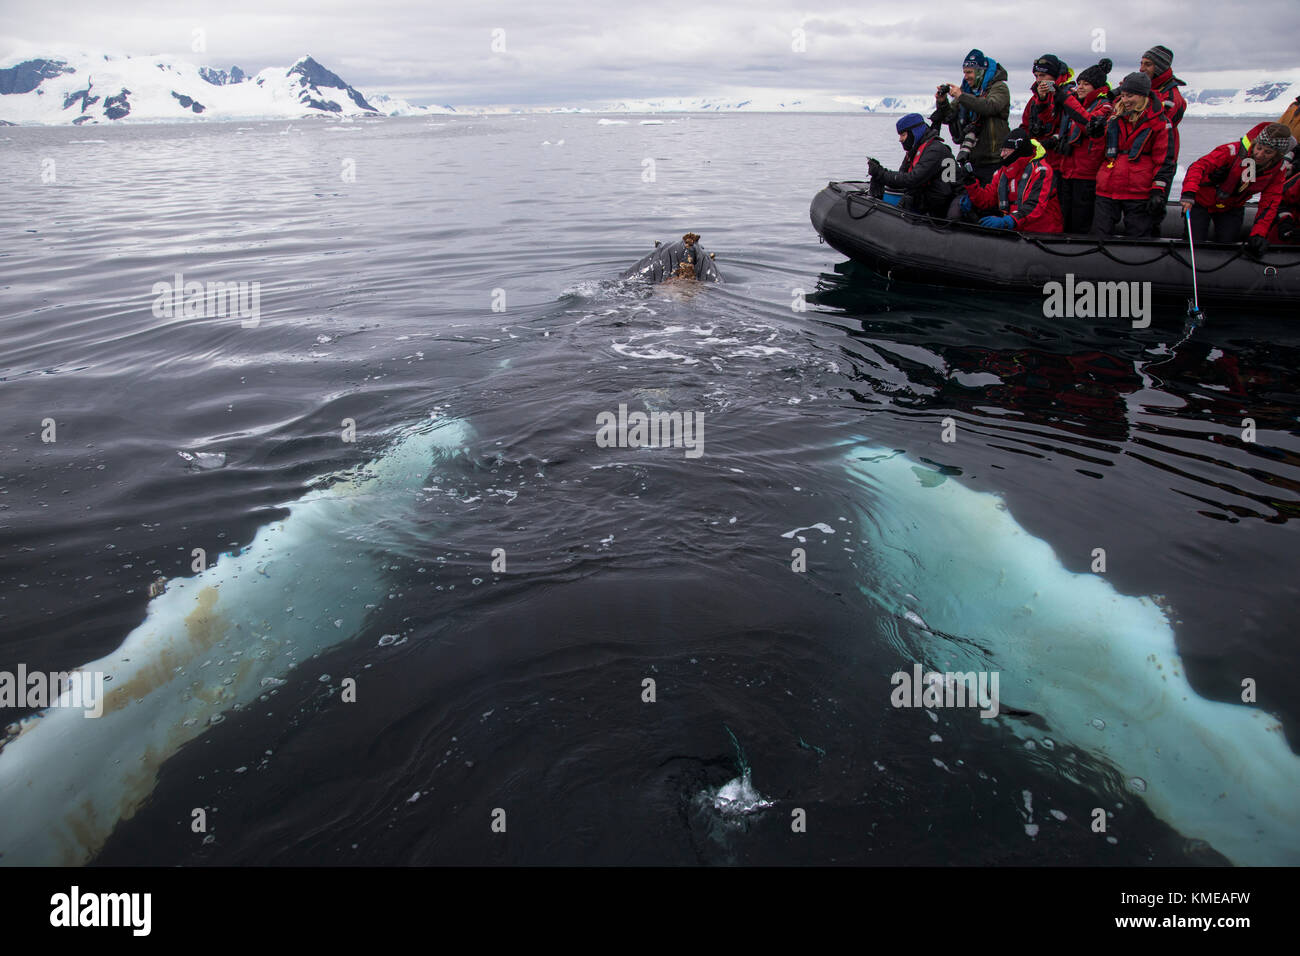 Group of people on inflatable raft watching whales,Antarctica Stock Photo